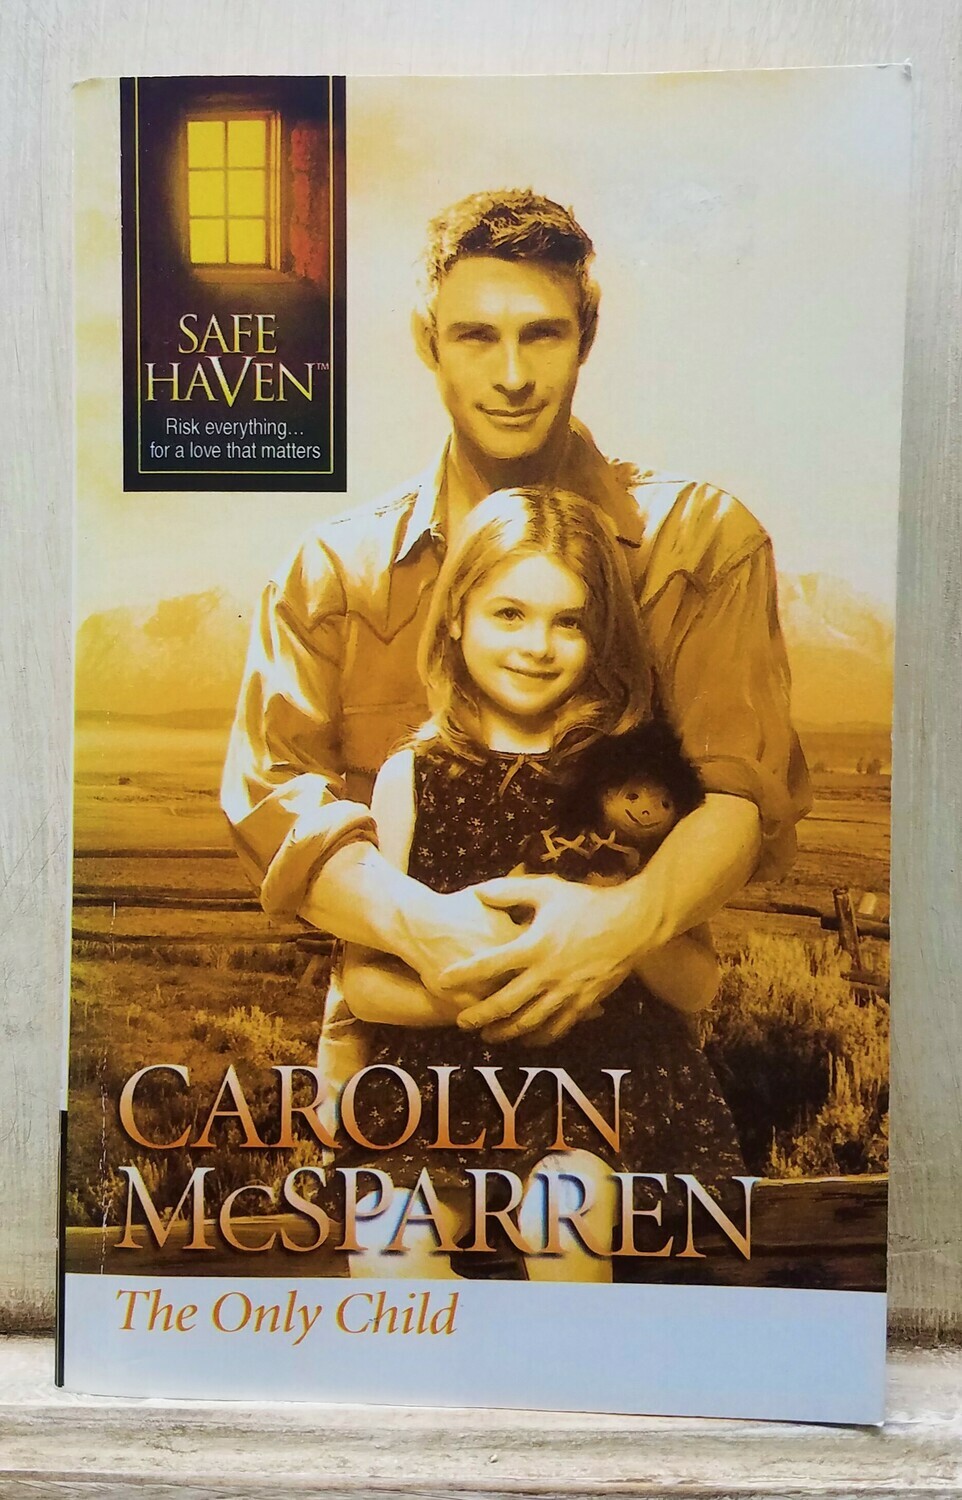 The Only Child by Carolyn McSparren